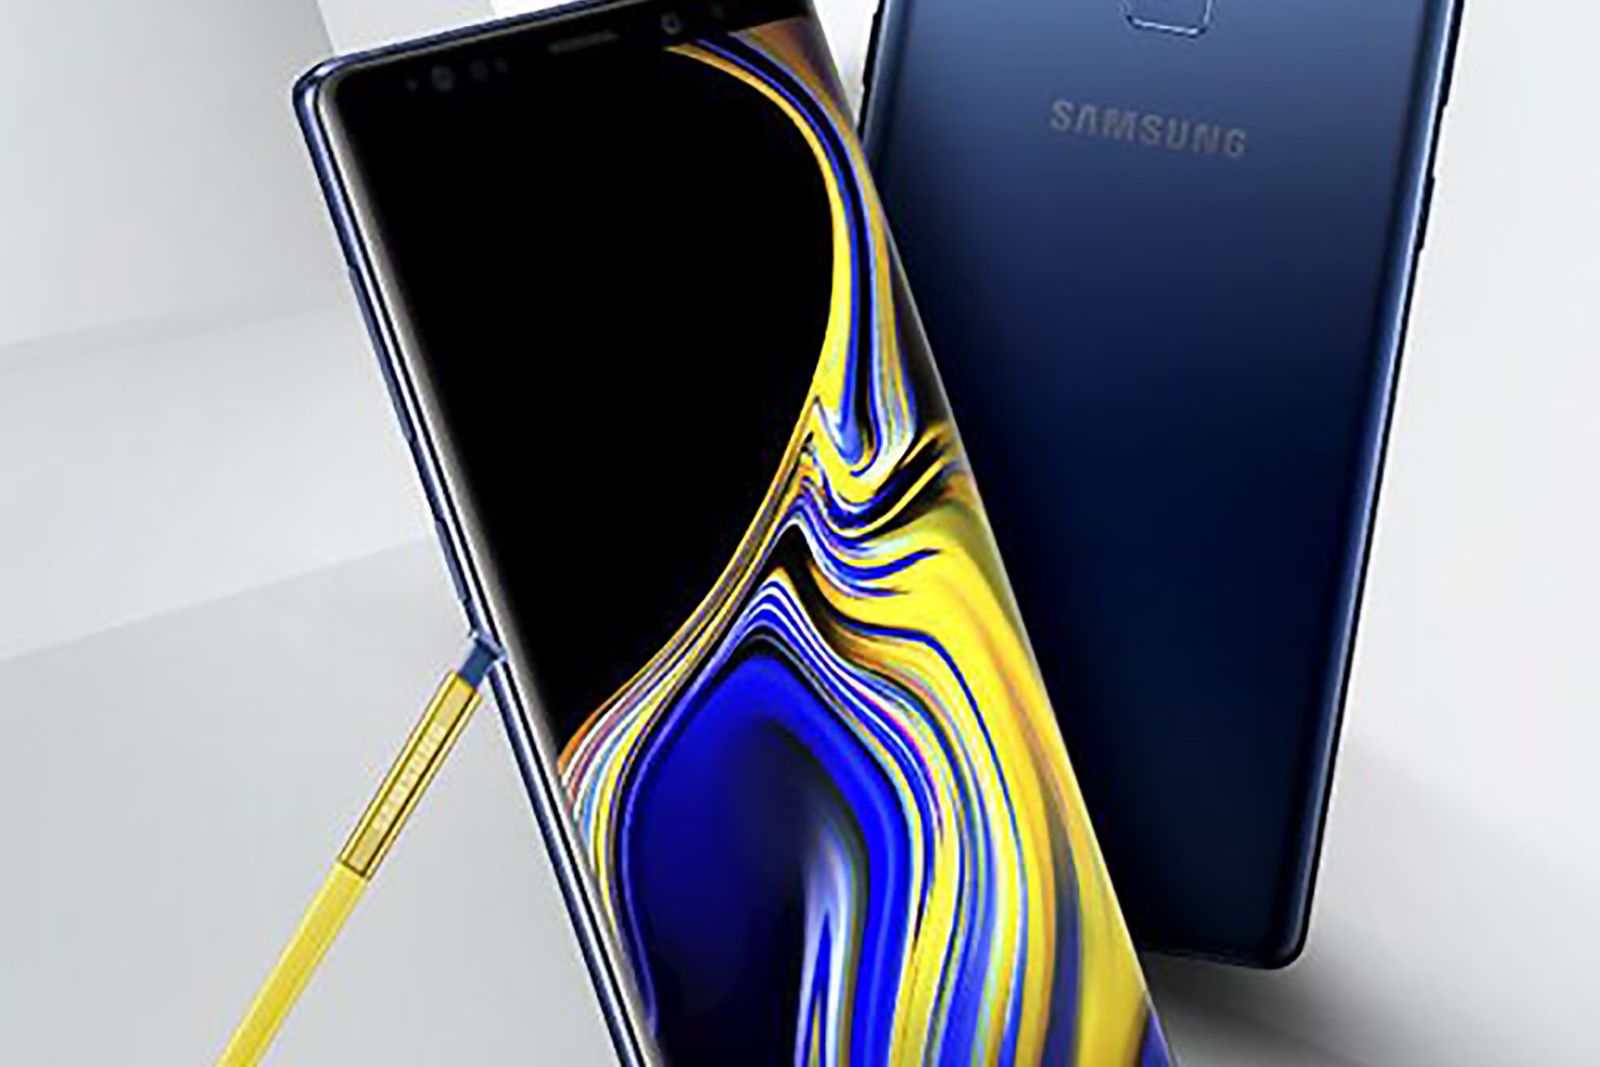 Galaxy Note 9 and bright yellow stylus revealed in leaked pic image 1